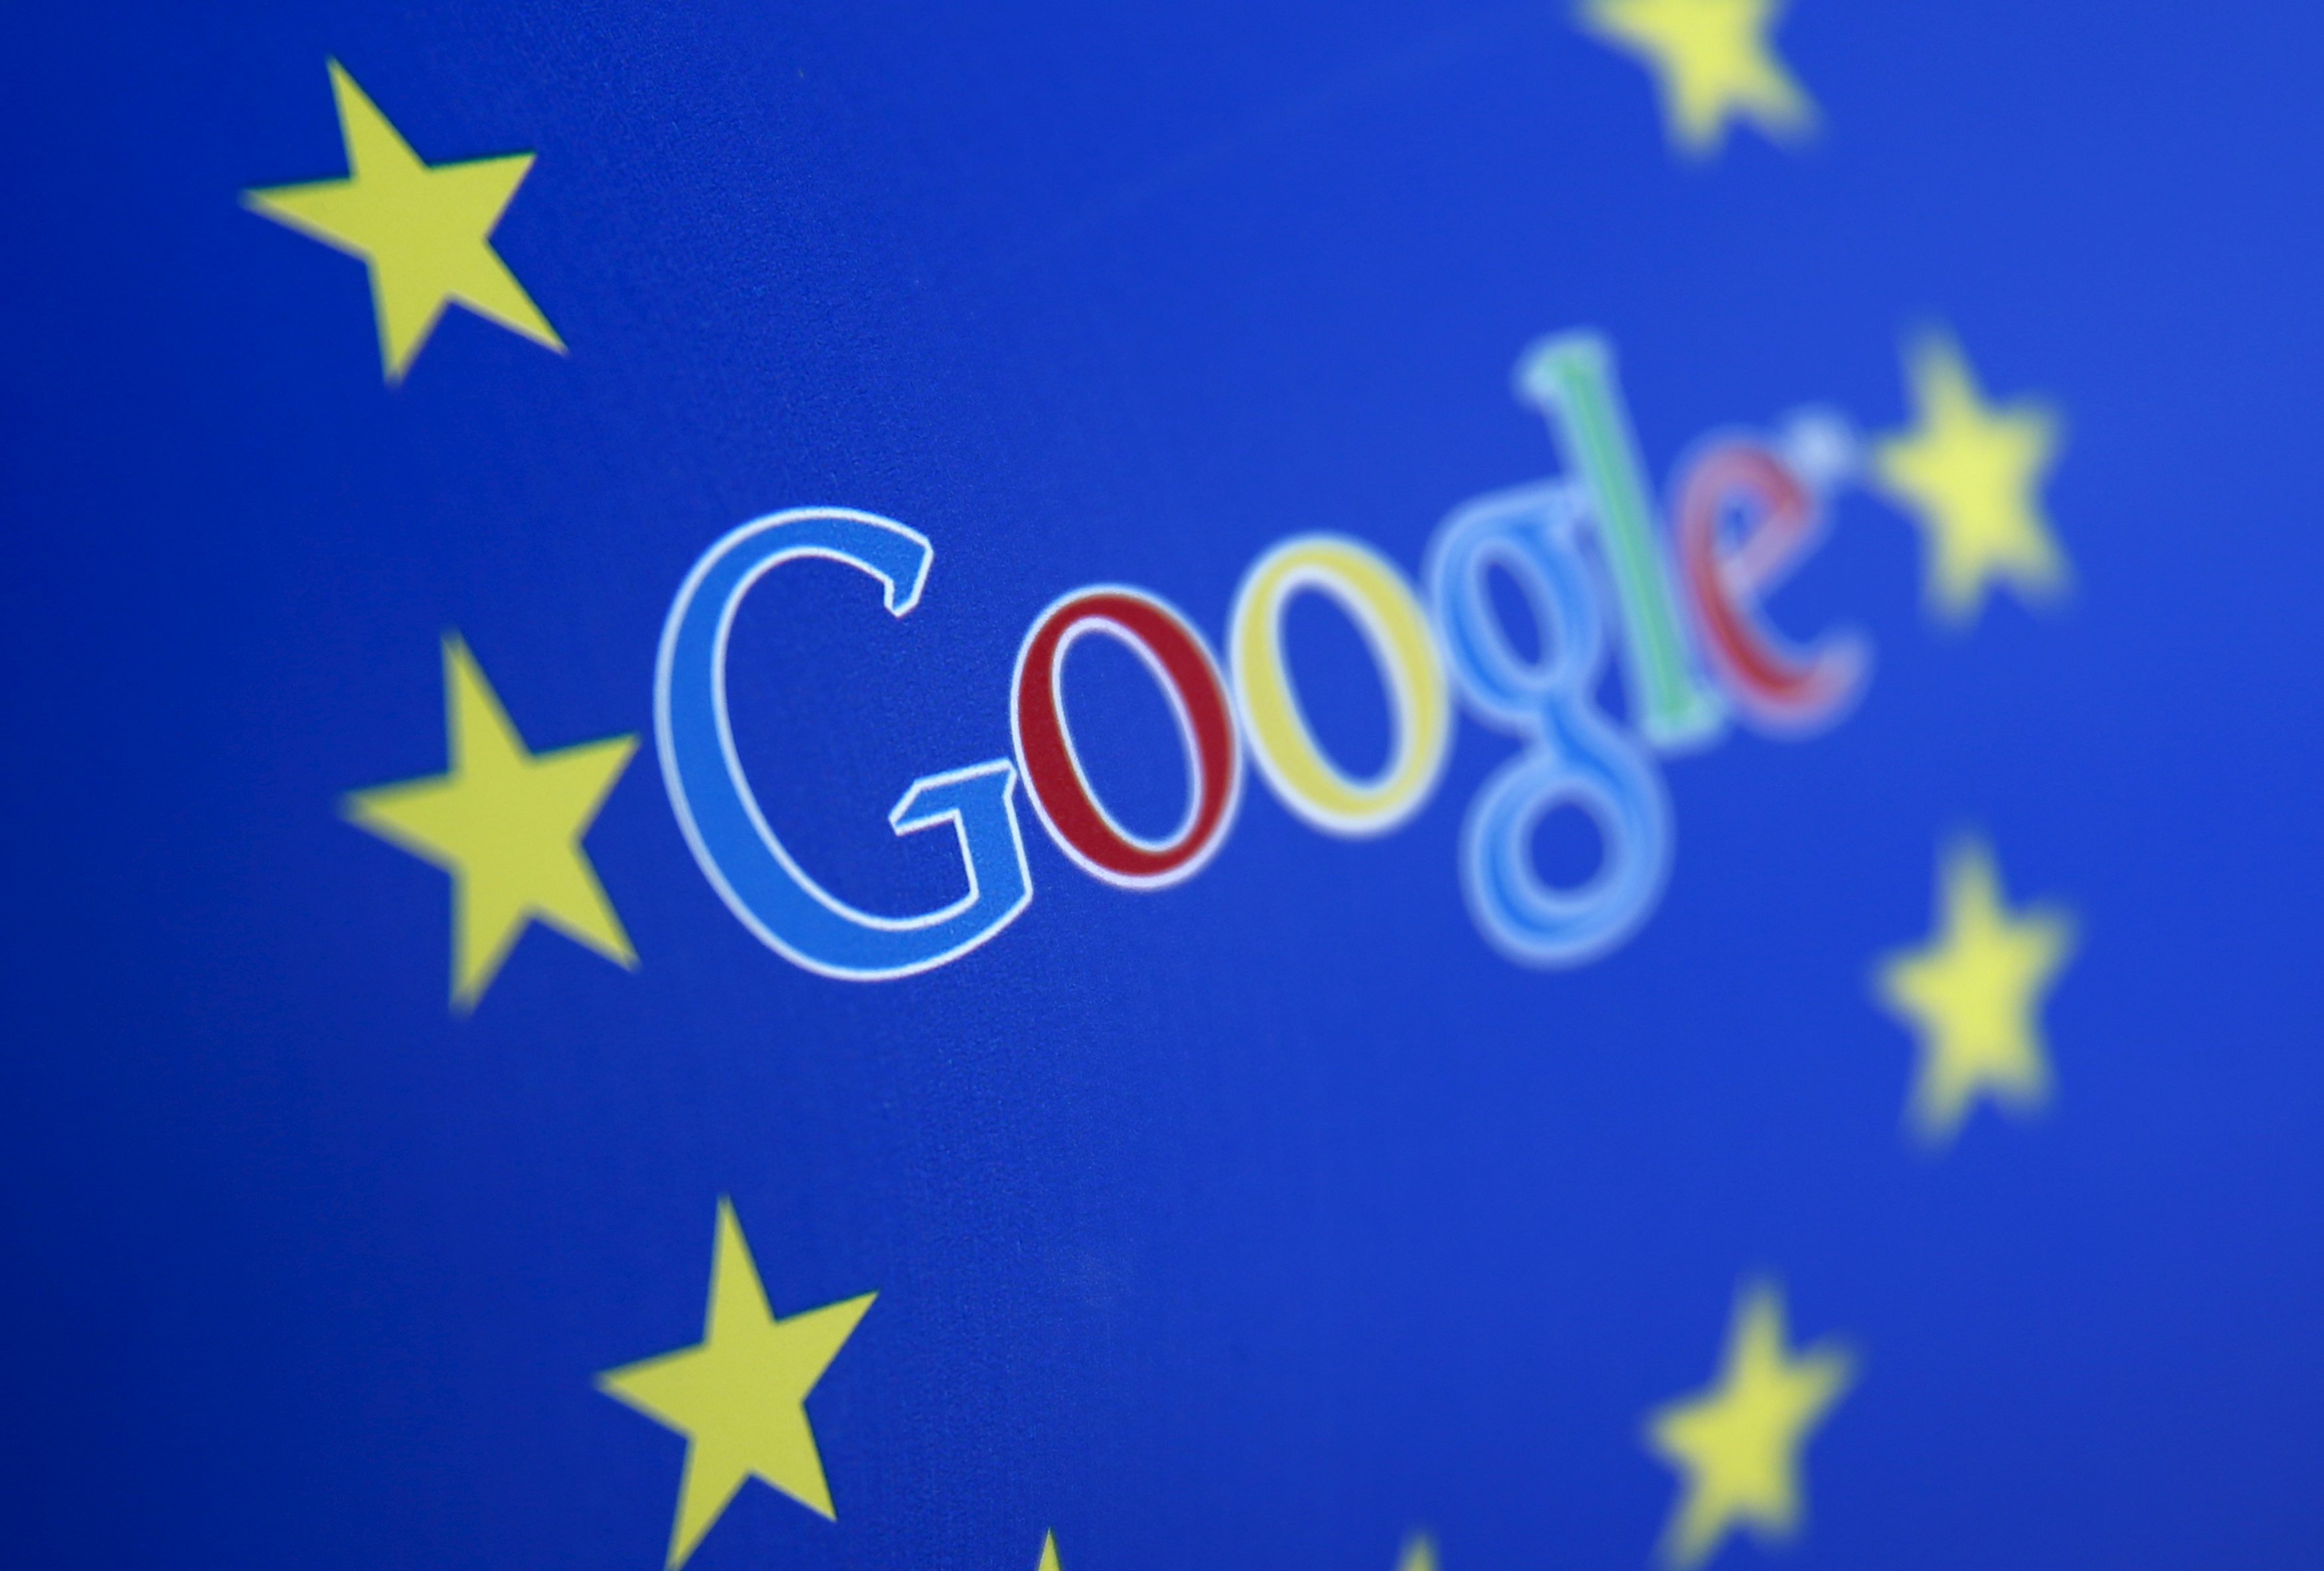 Google and European Union logos are seen in Sarajevo, in this April 15, 2015 photo illustration. (Dado Ruvic—Reuters)